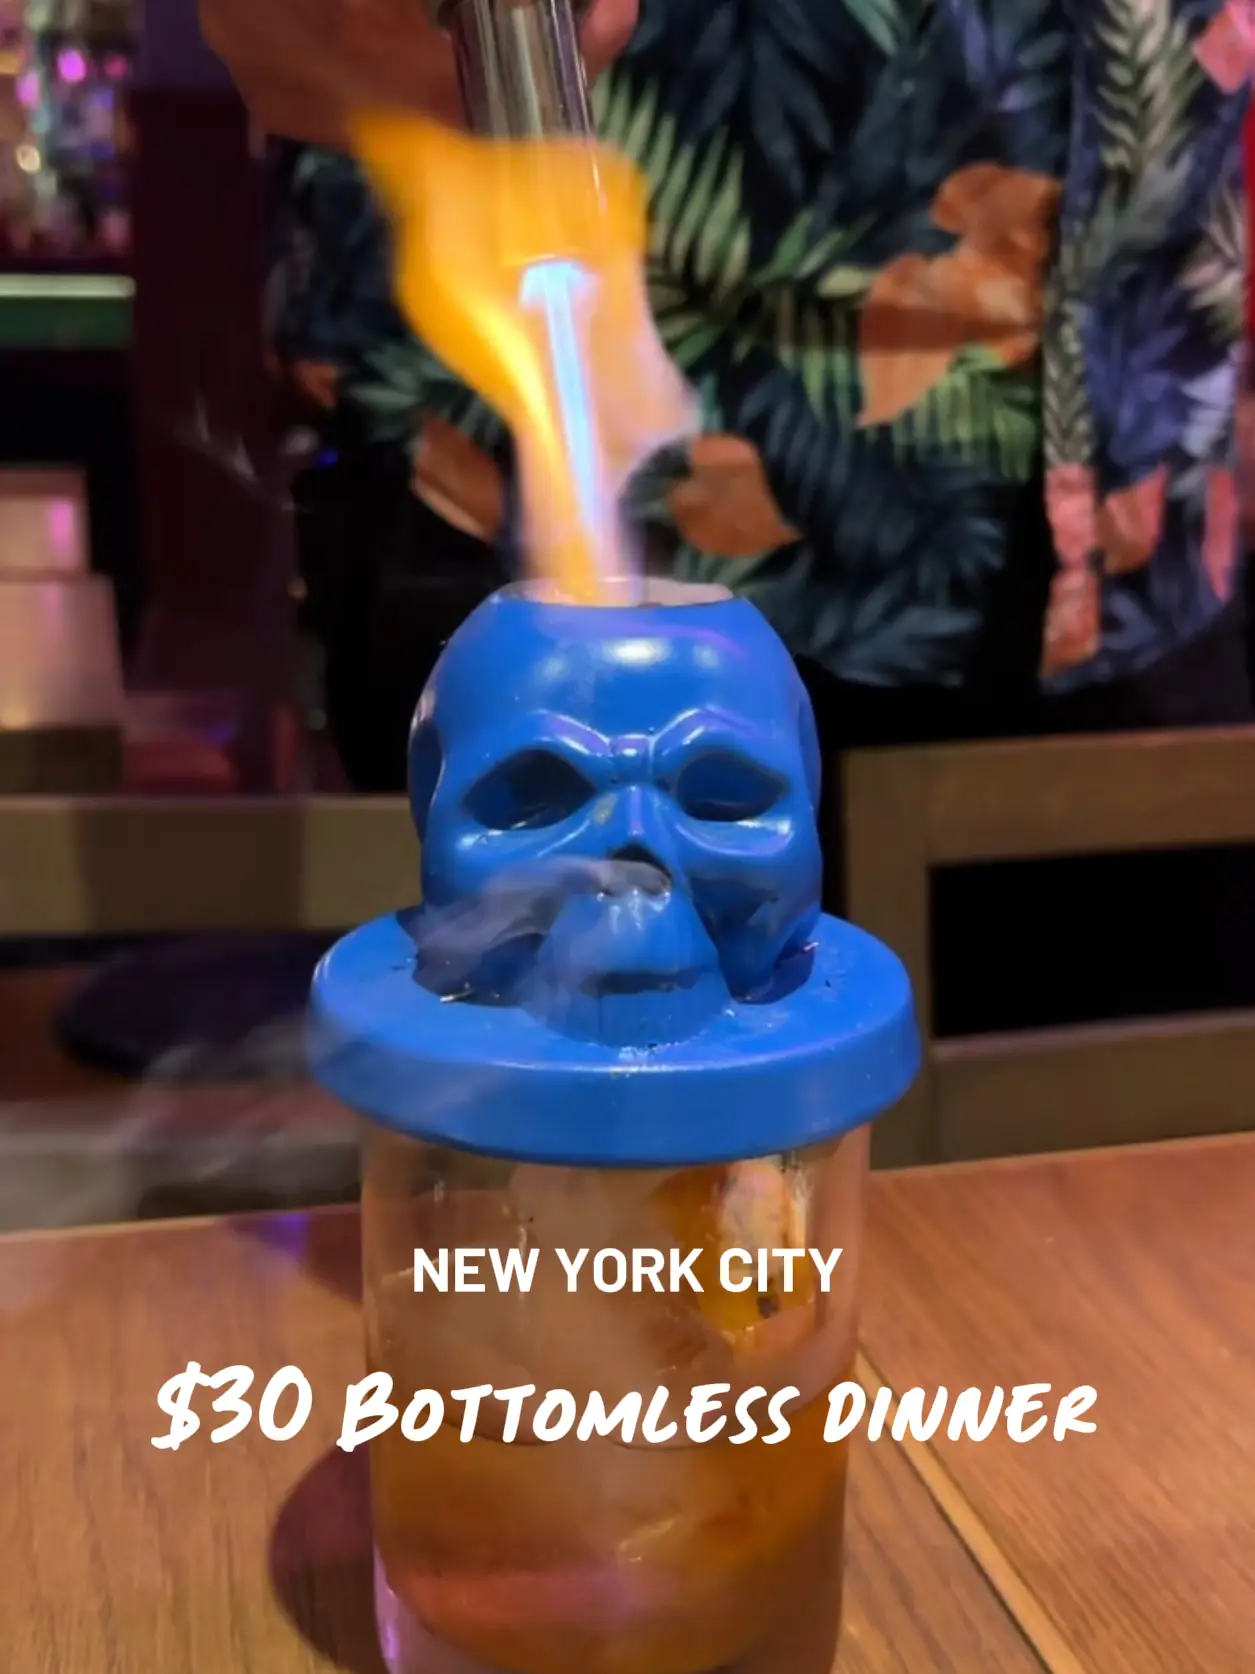 $30 Bottomless Dinner in NYC's images